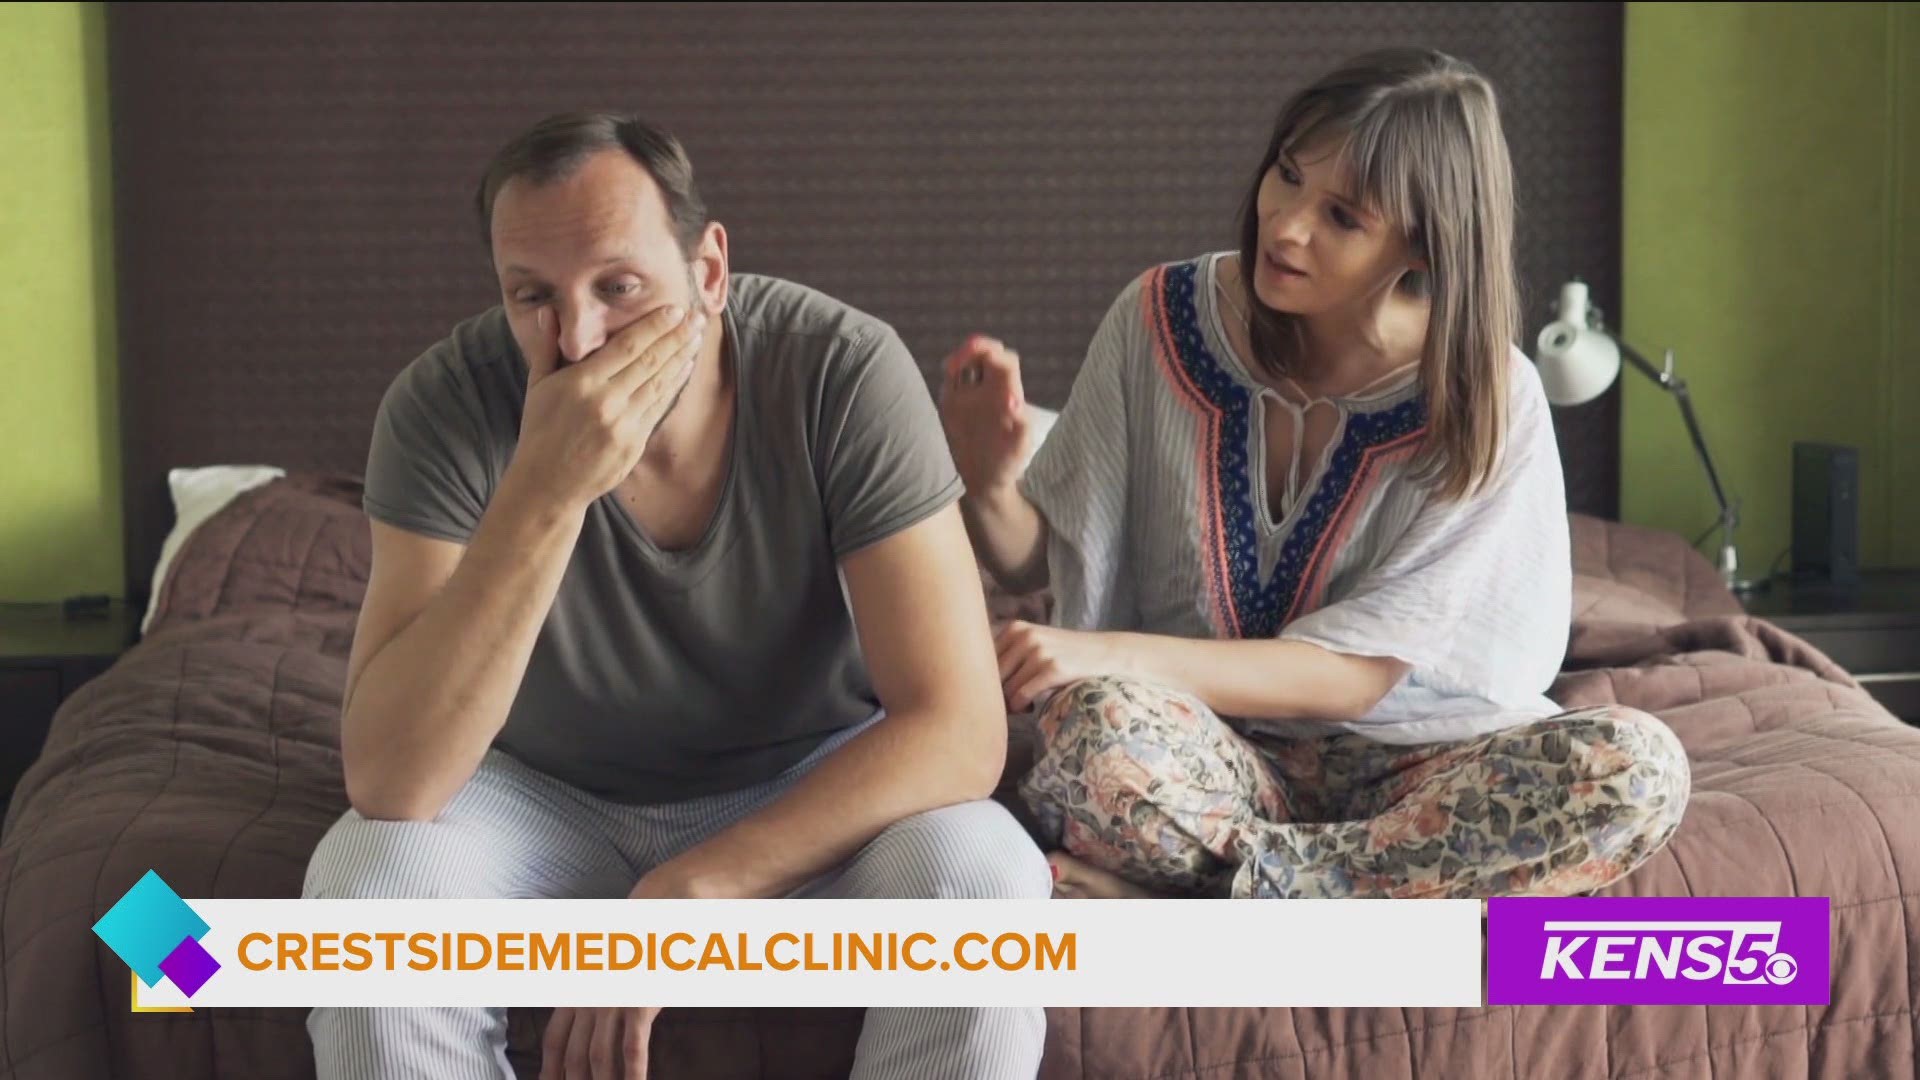 Crest Side Medical Clinic shares long-term solutions to erectile dysfunction.